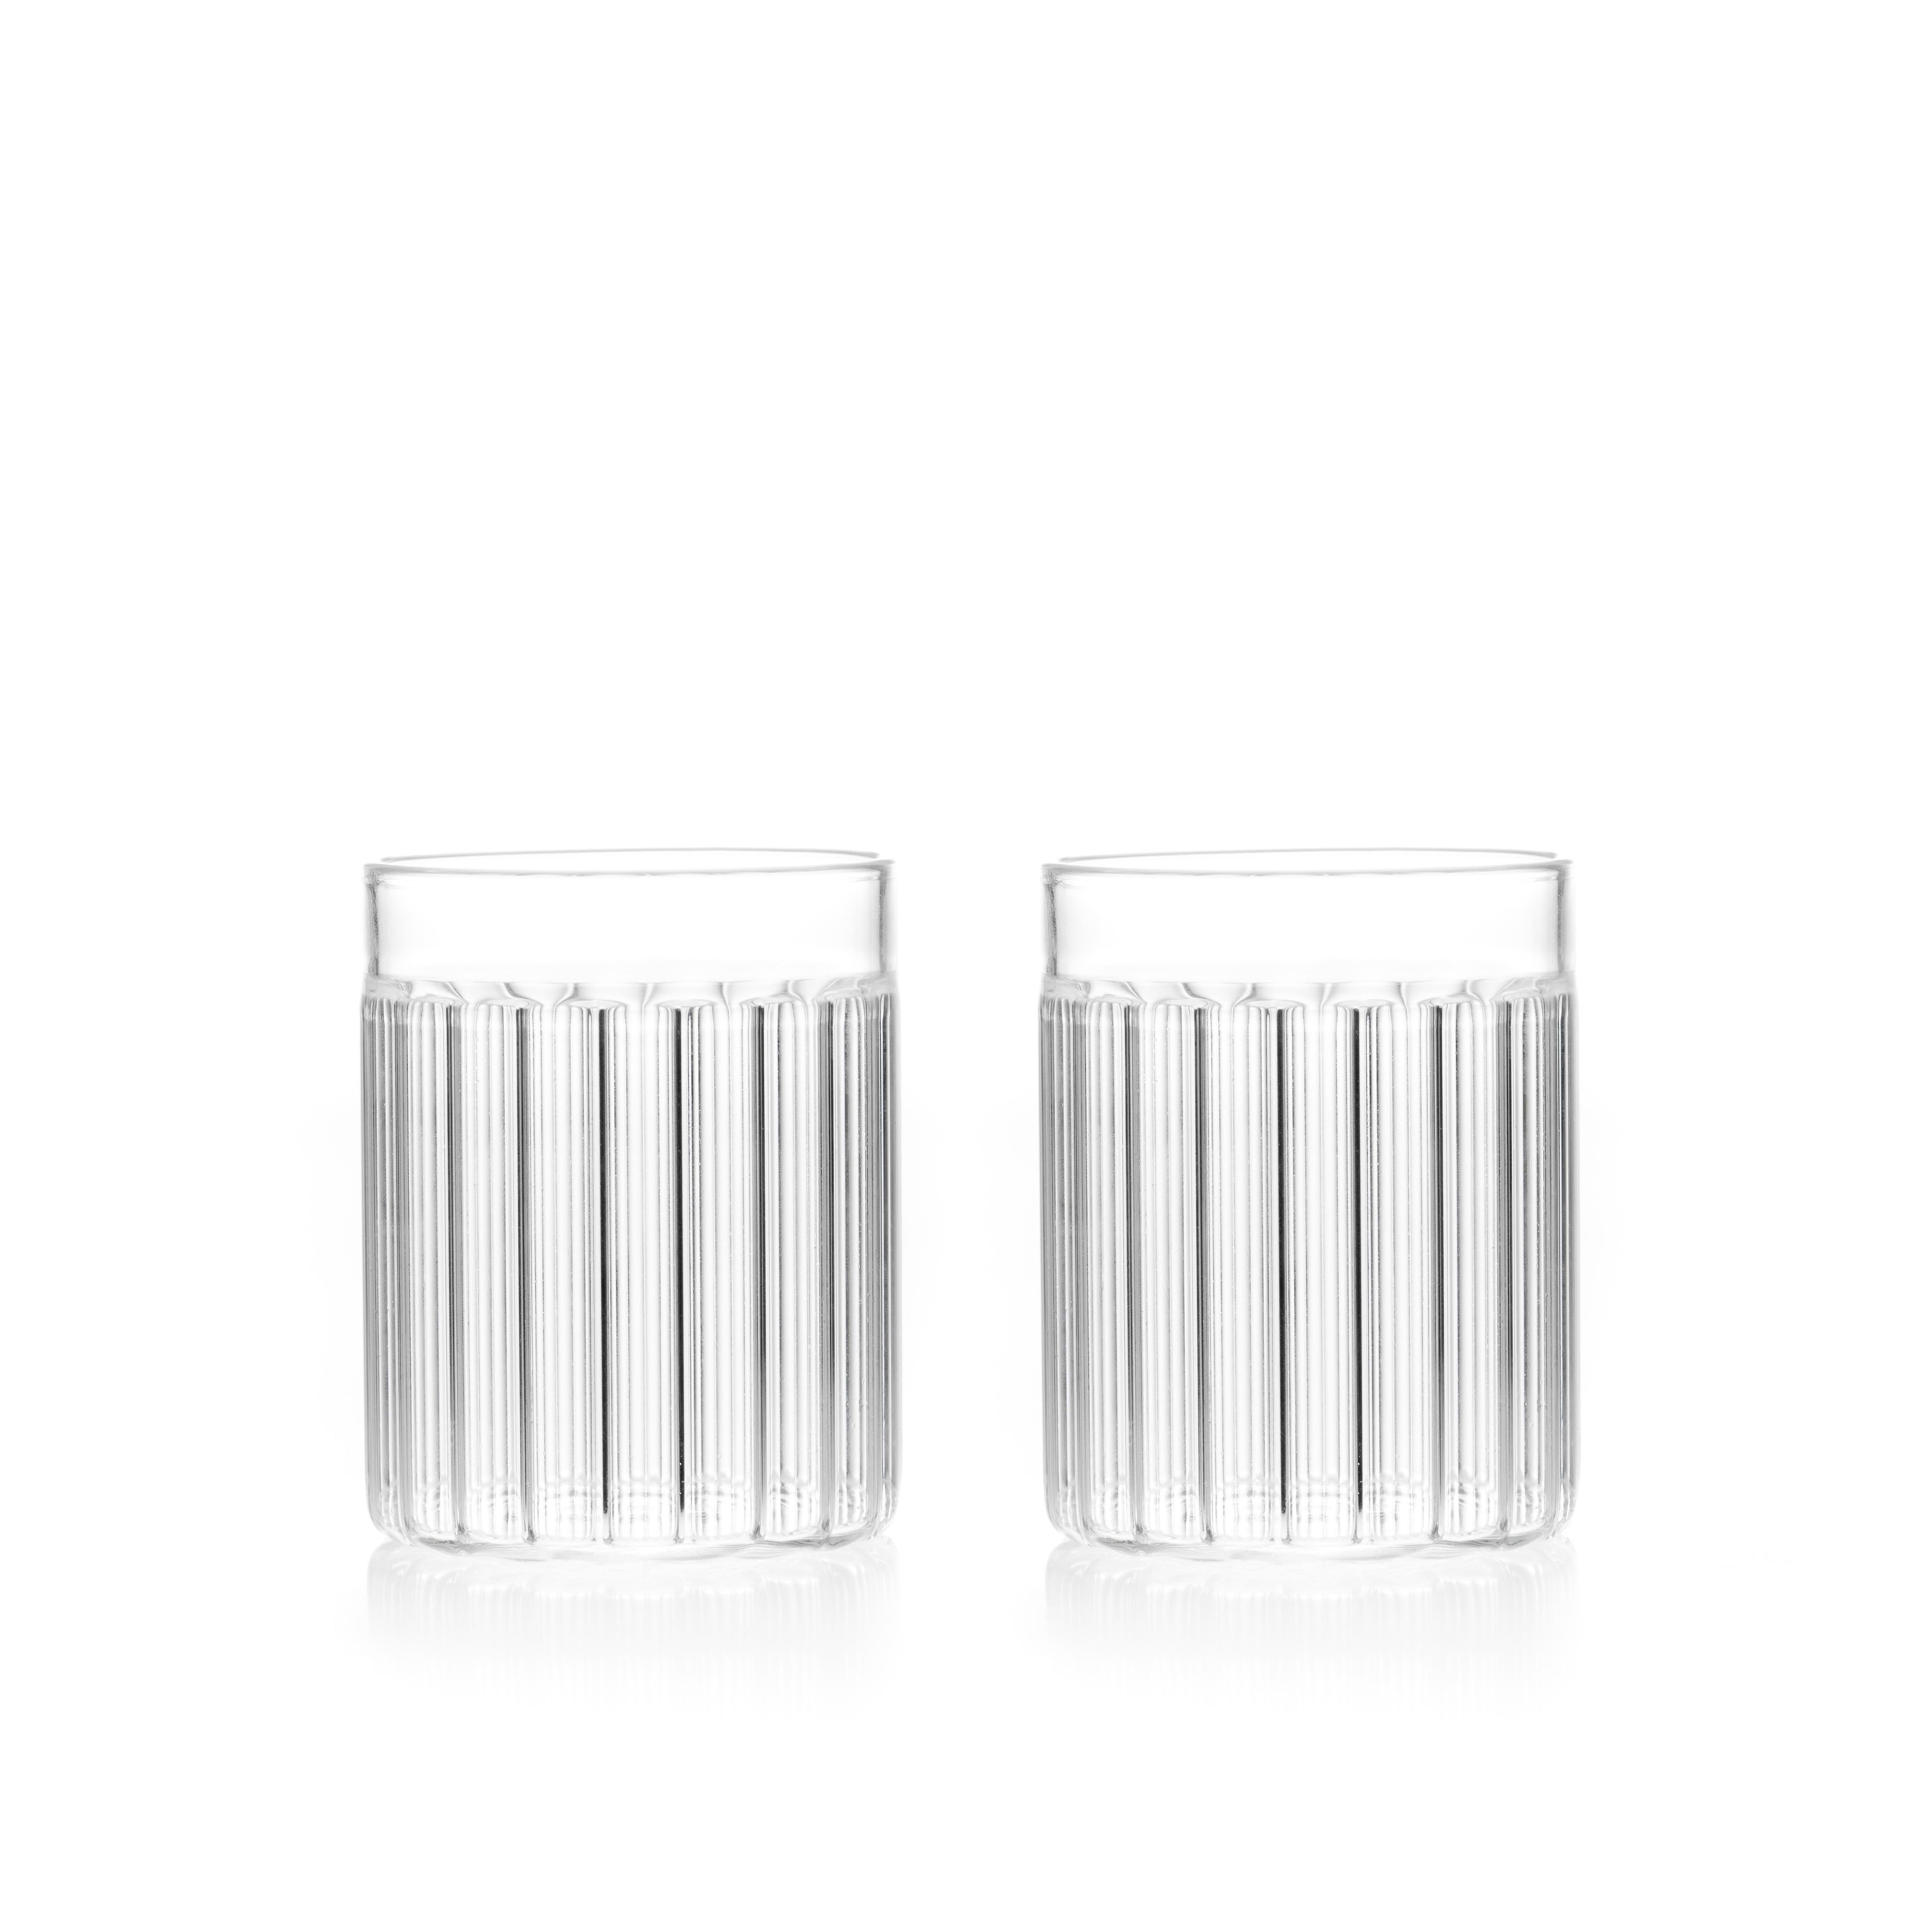 Inspired by a trip to the healing hot springs of an onsen in Bessho, Japan, the Bessho Collection is an exploration by Ferrone that challenges handcraft techniques by creating a ribbon of smooth glass around the rim, establishing a visual and